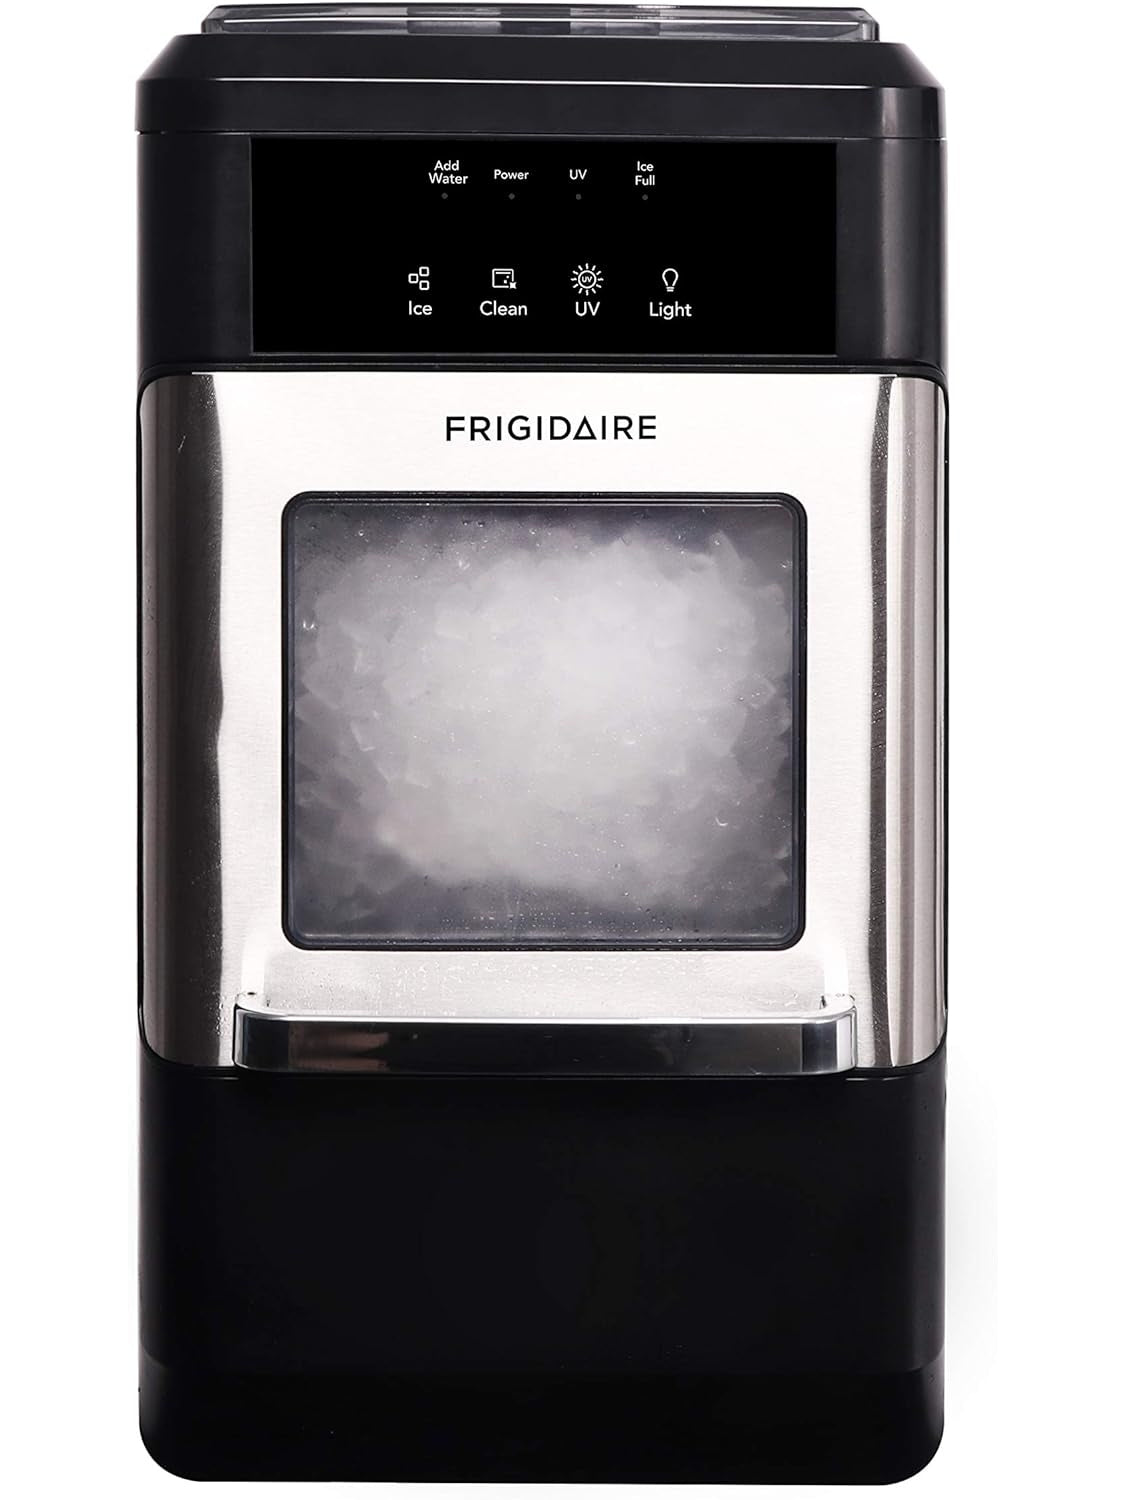 Frigidaire EFIC235-AMZ Countertop Crunchy Chewable Nugget Ice Maker, 44lbs per day, Self Cleaning Function